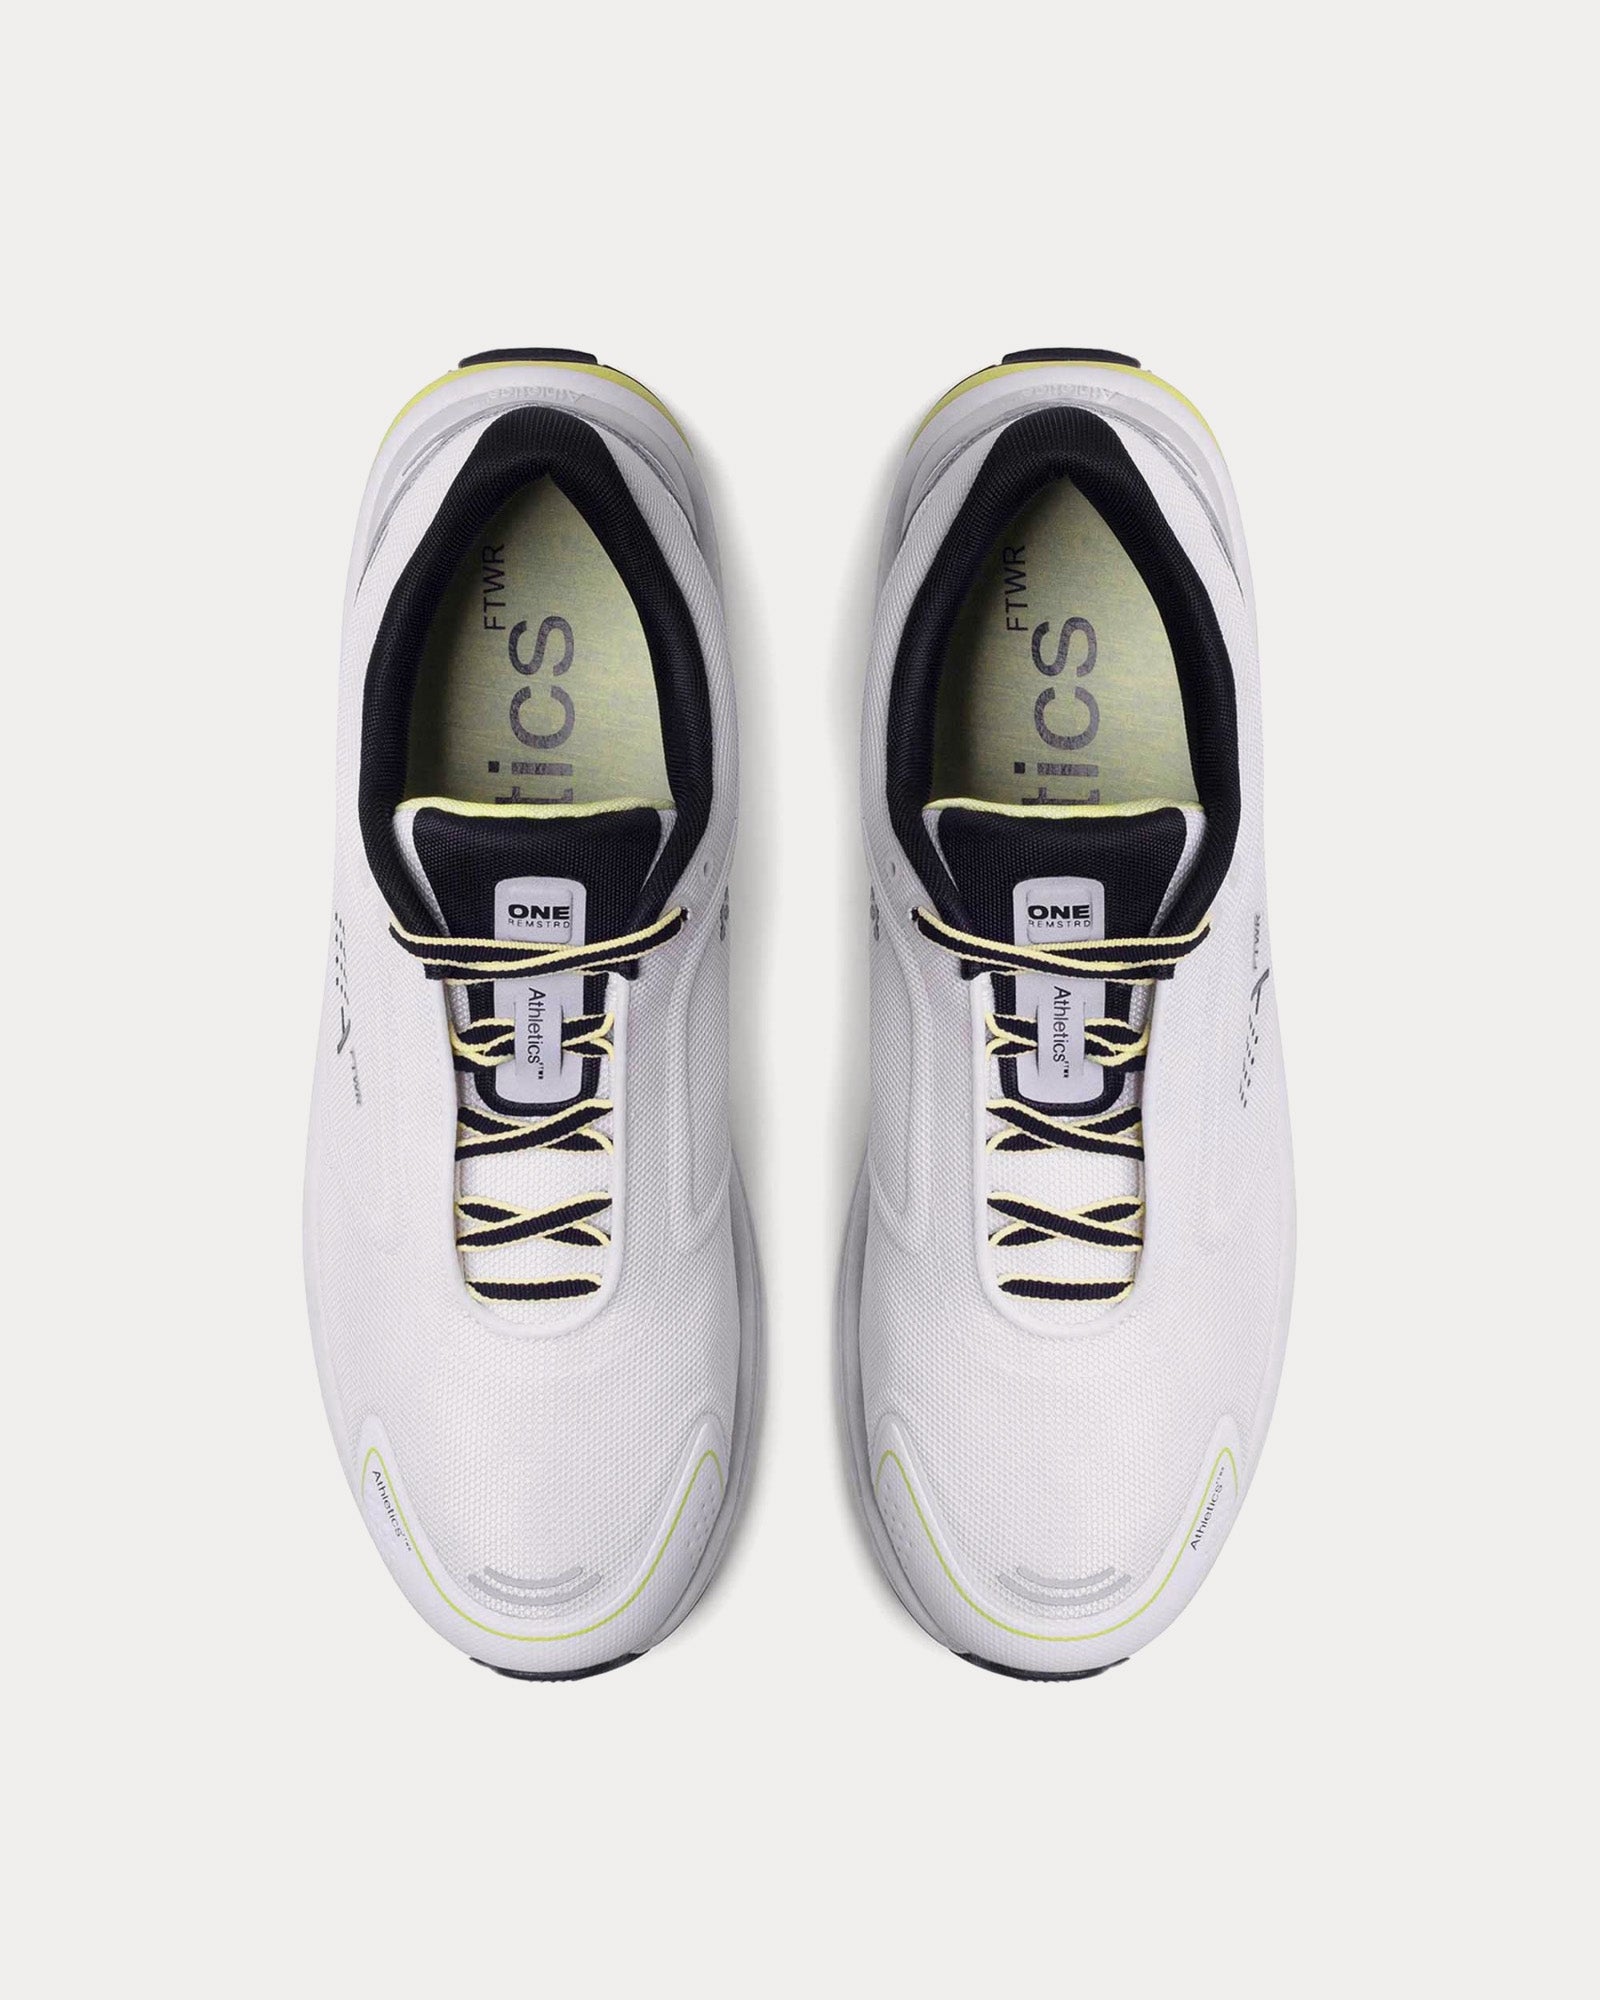 Athletics FTWR - One Remastered White / Silver Low Top Sneakers